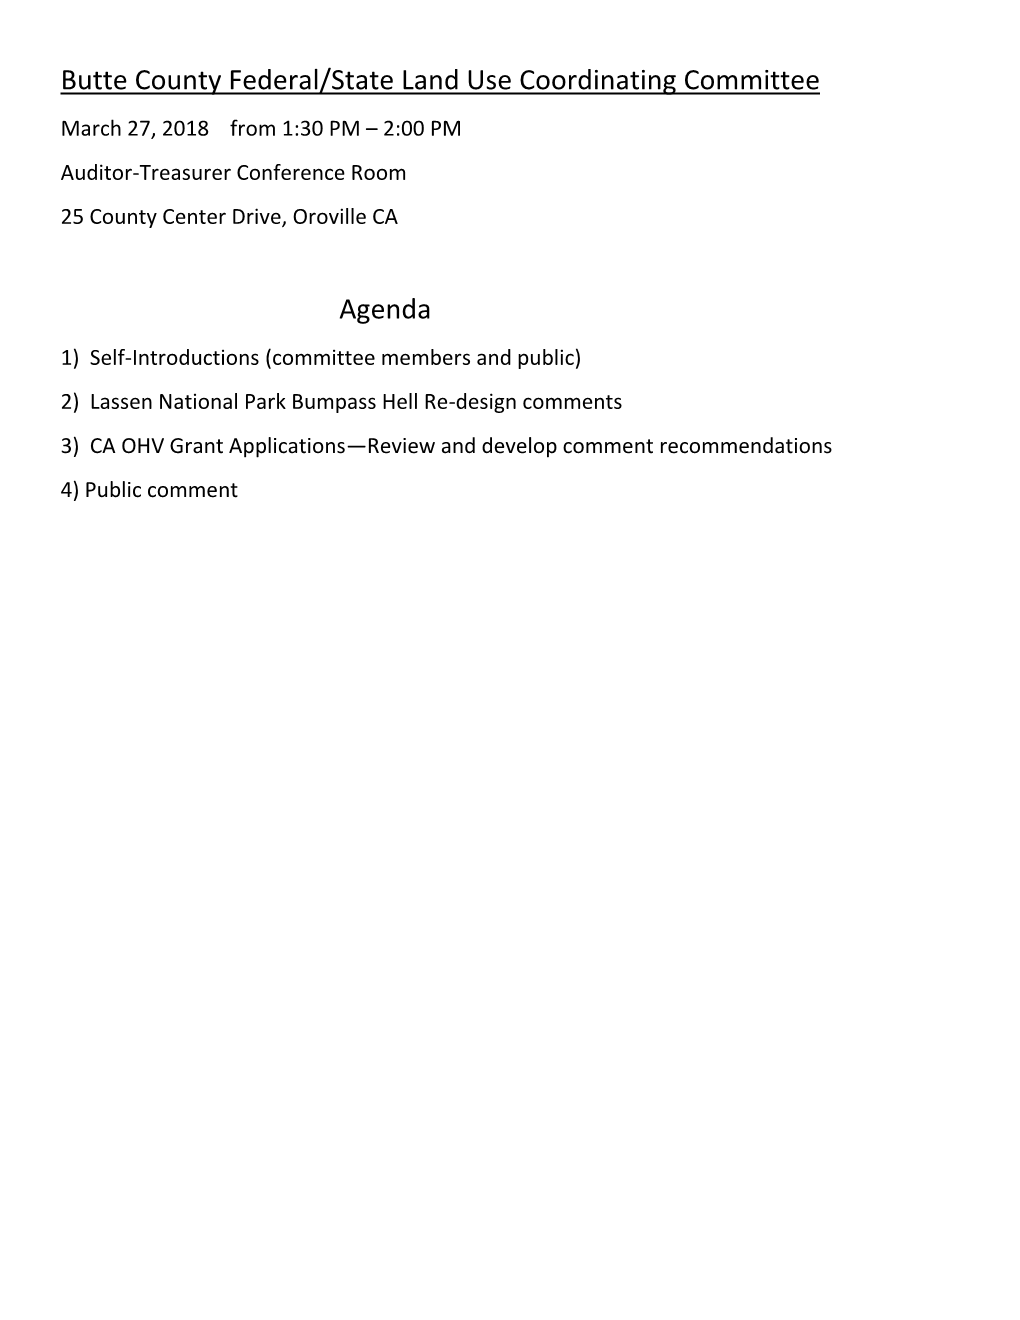 Butte County Federal/State Land Use Coordinating Committee Agenda